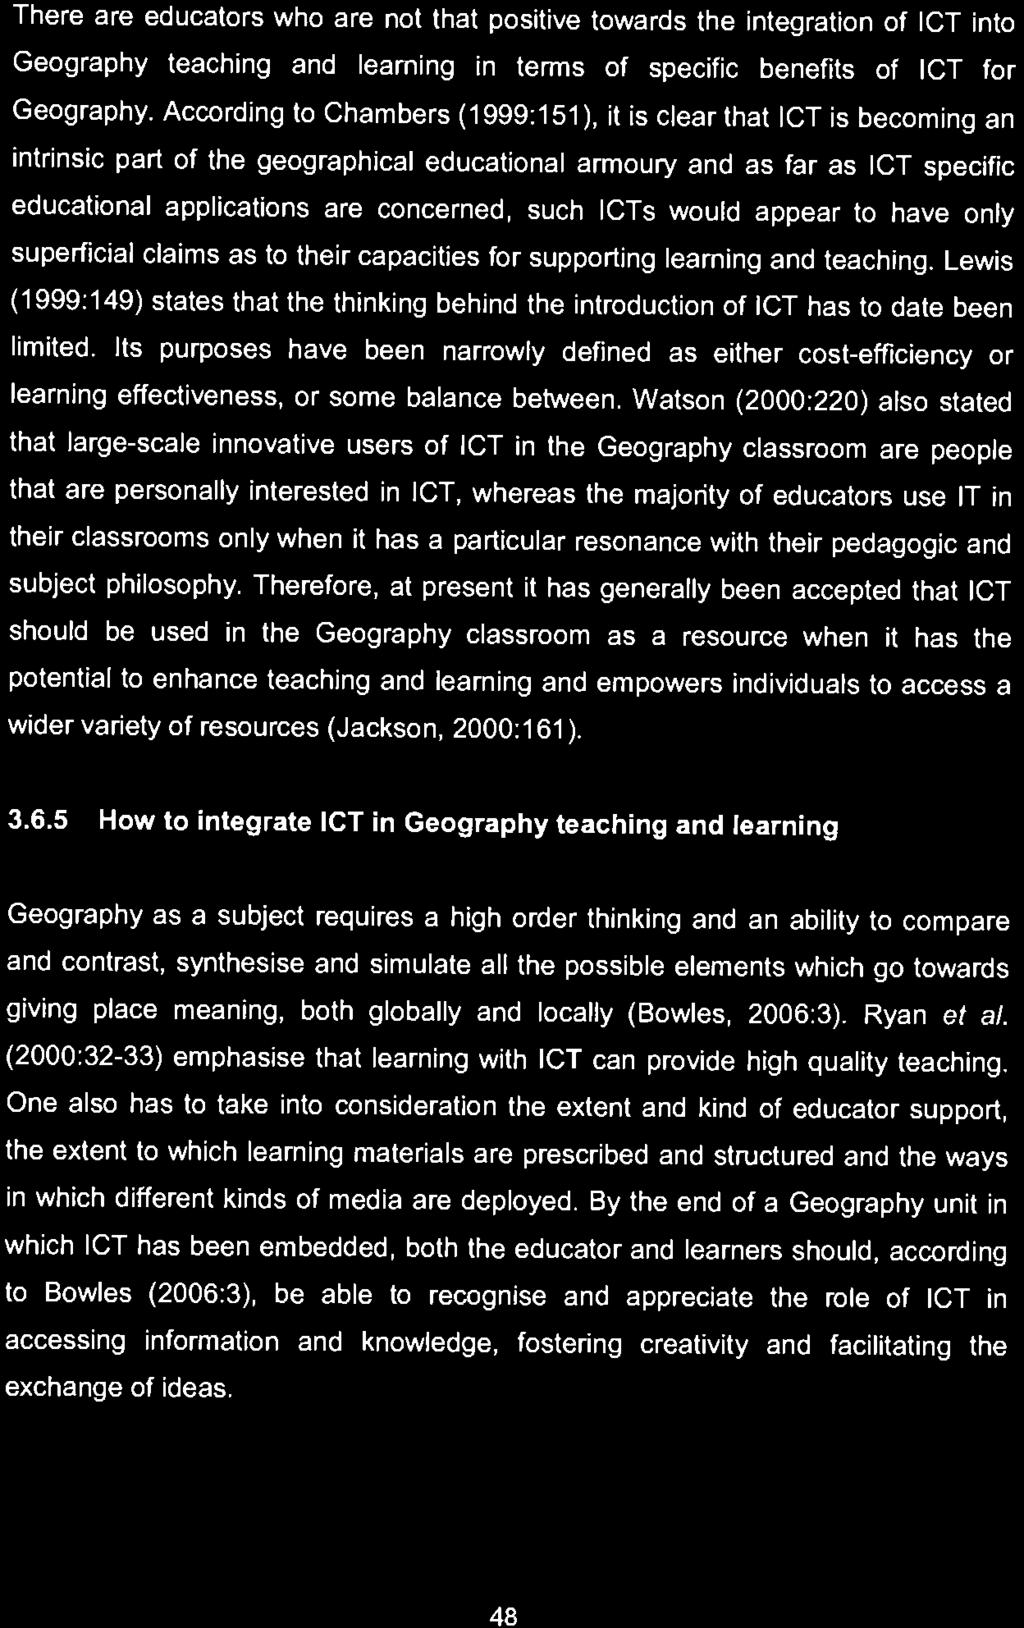 lcts would appear to have only superficial claims as to their capacities for supporting learning and teaching.